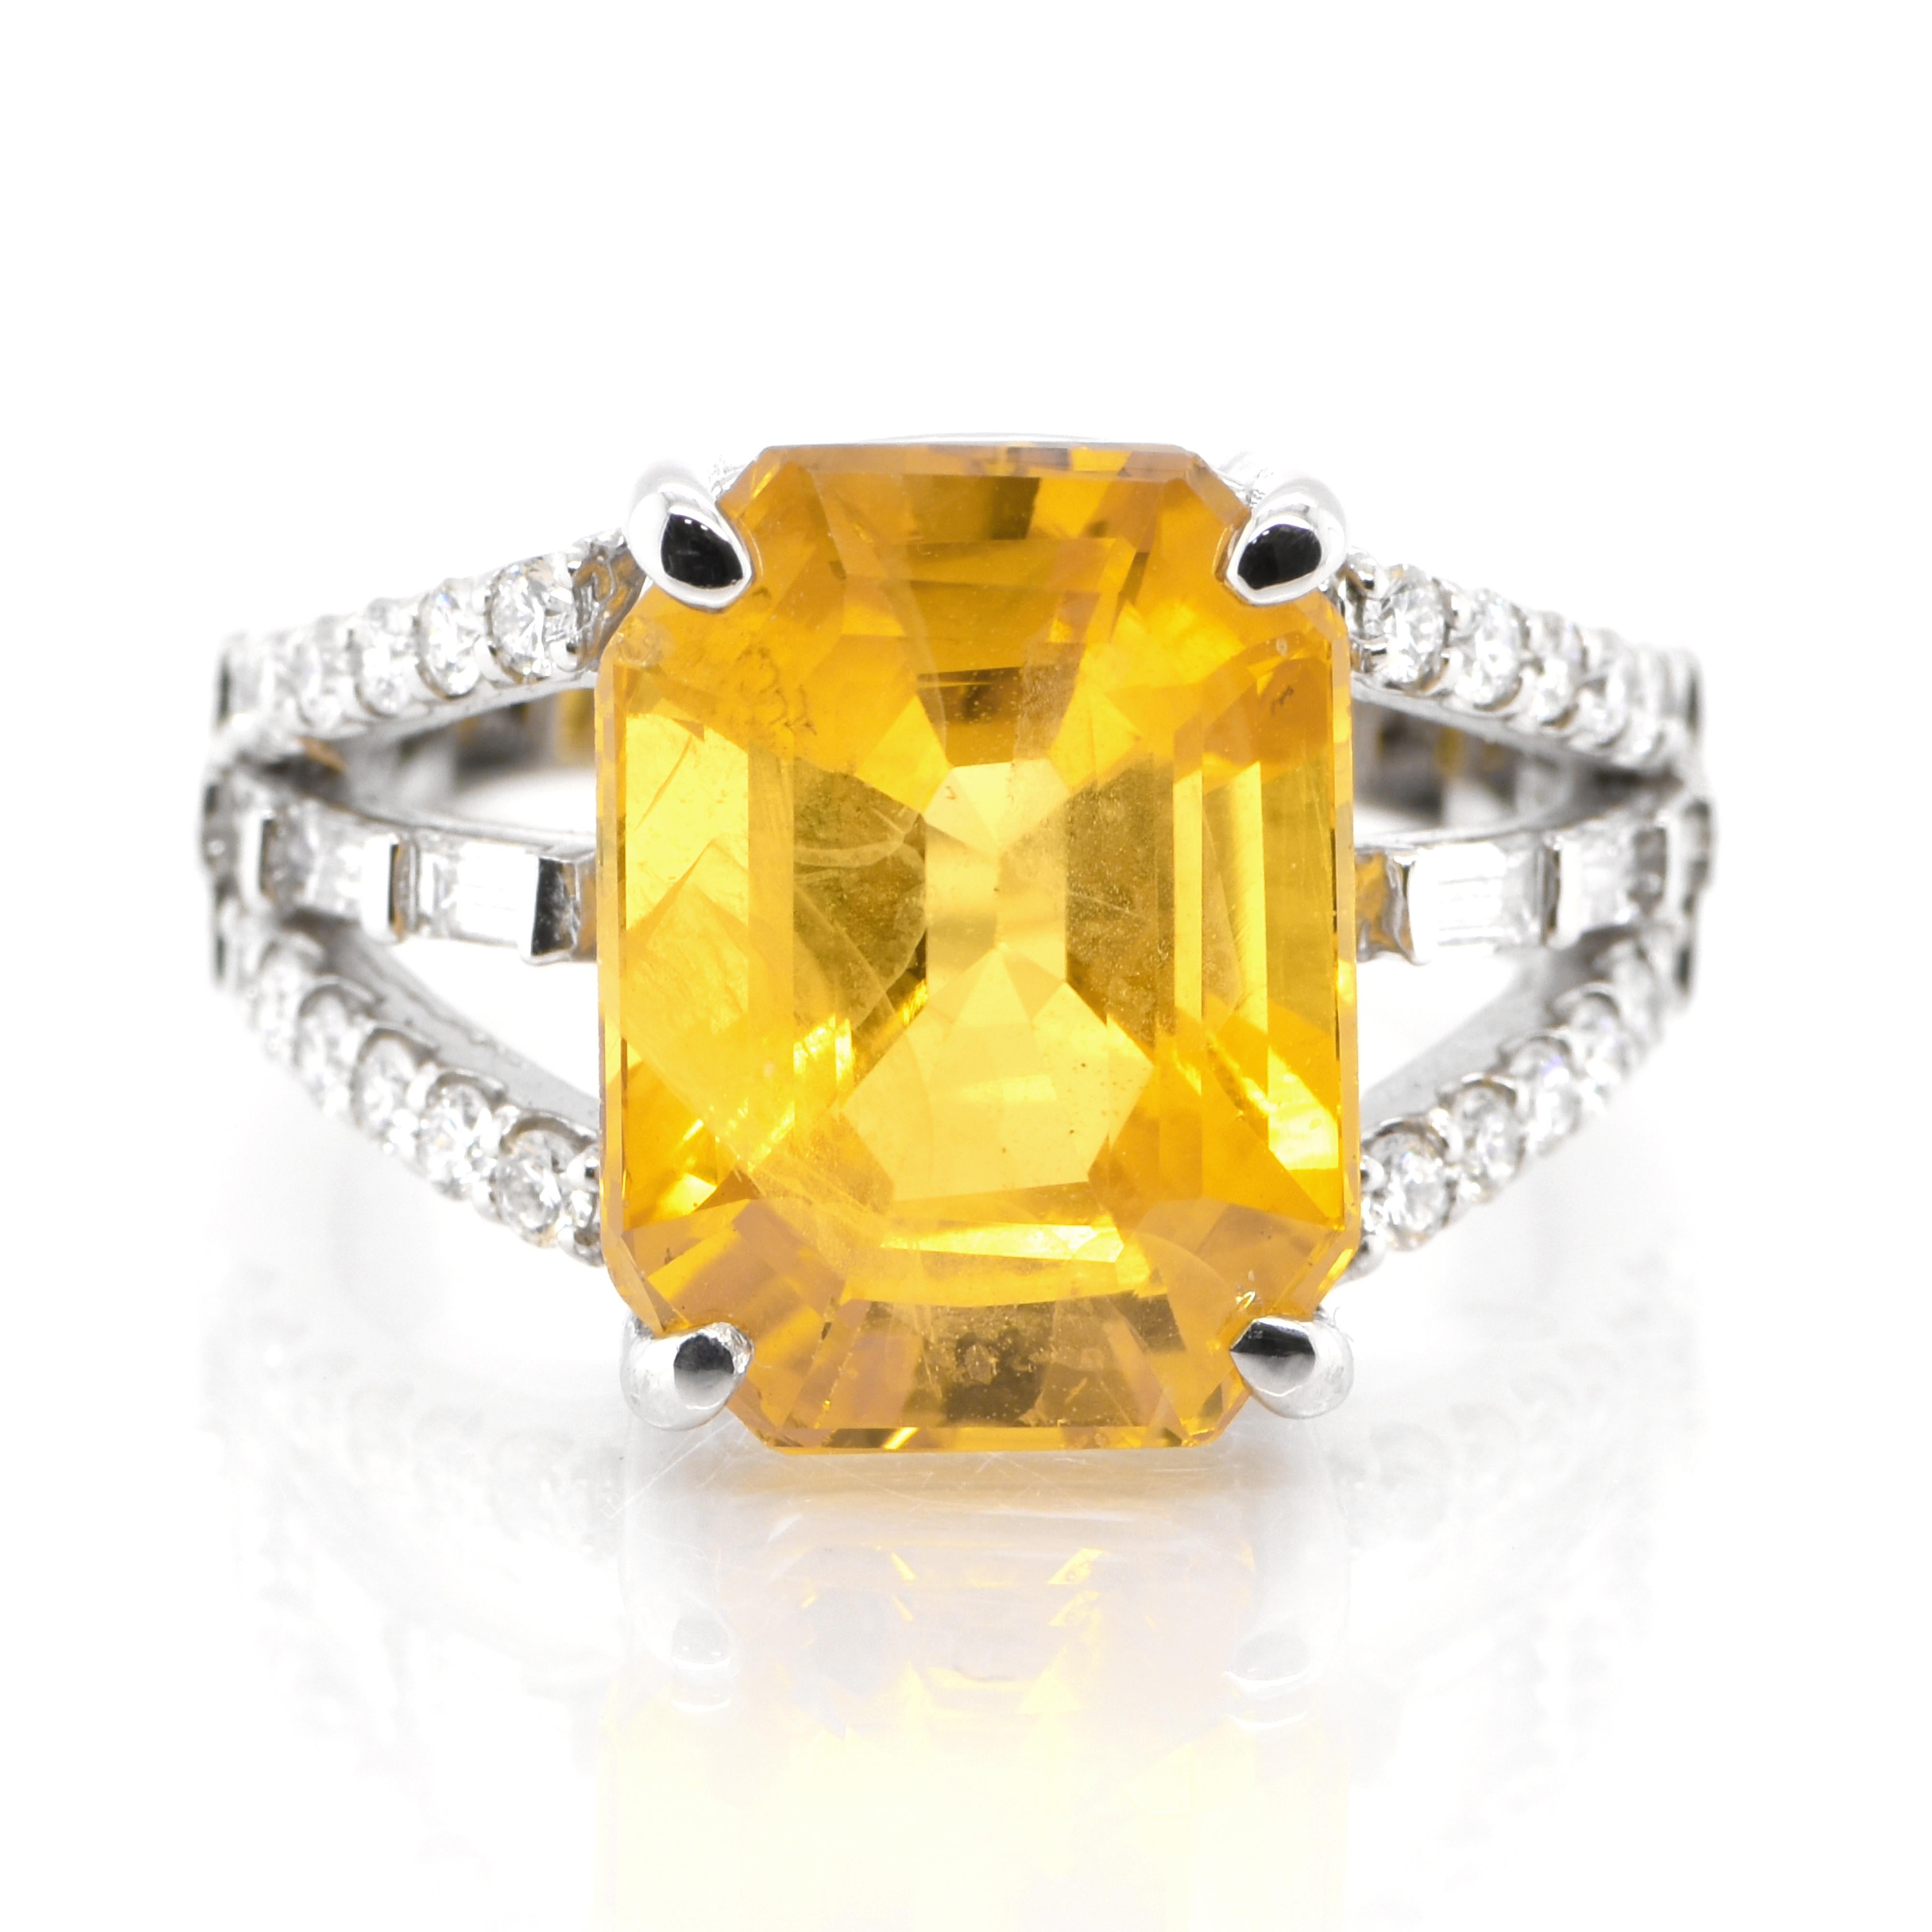 A stunning Cocktail Ring featuring a GIA Certified 9.78 Carat Natural Yellow Sapphire and 0.58 Carats of Diamond Accents set in Platinum. The Yellow Sapphire is heat treated and color is induced by lattice diffusion treatment. Sapphires have